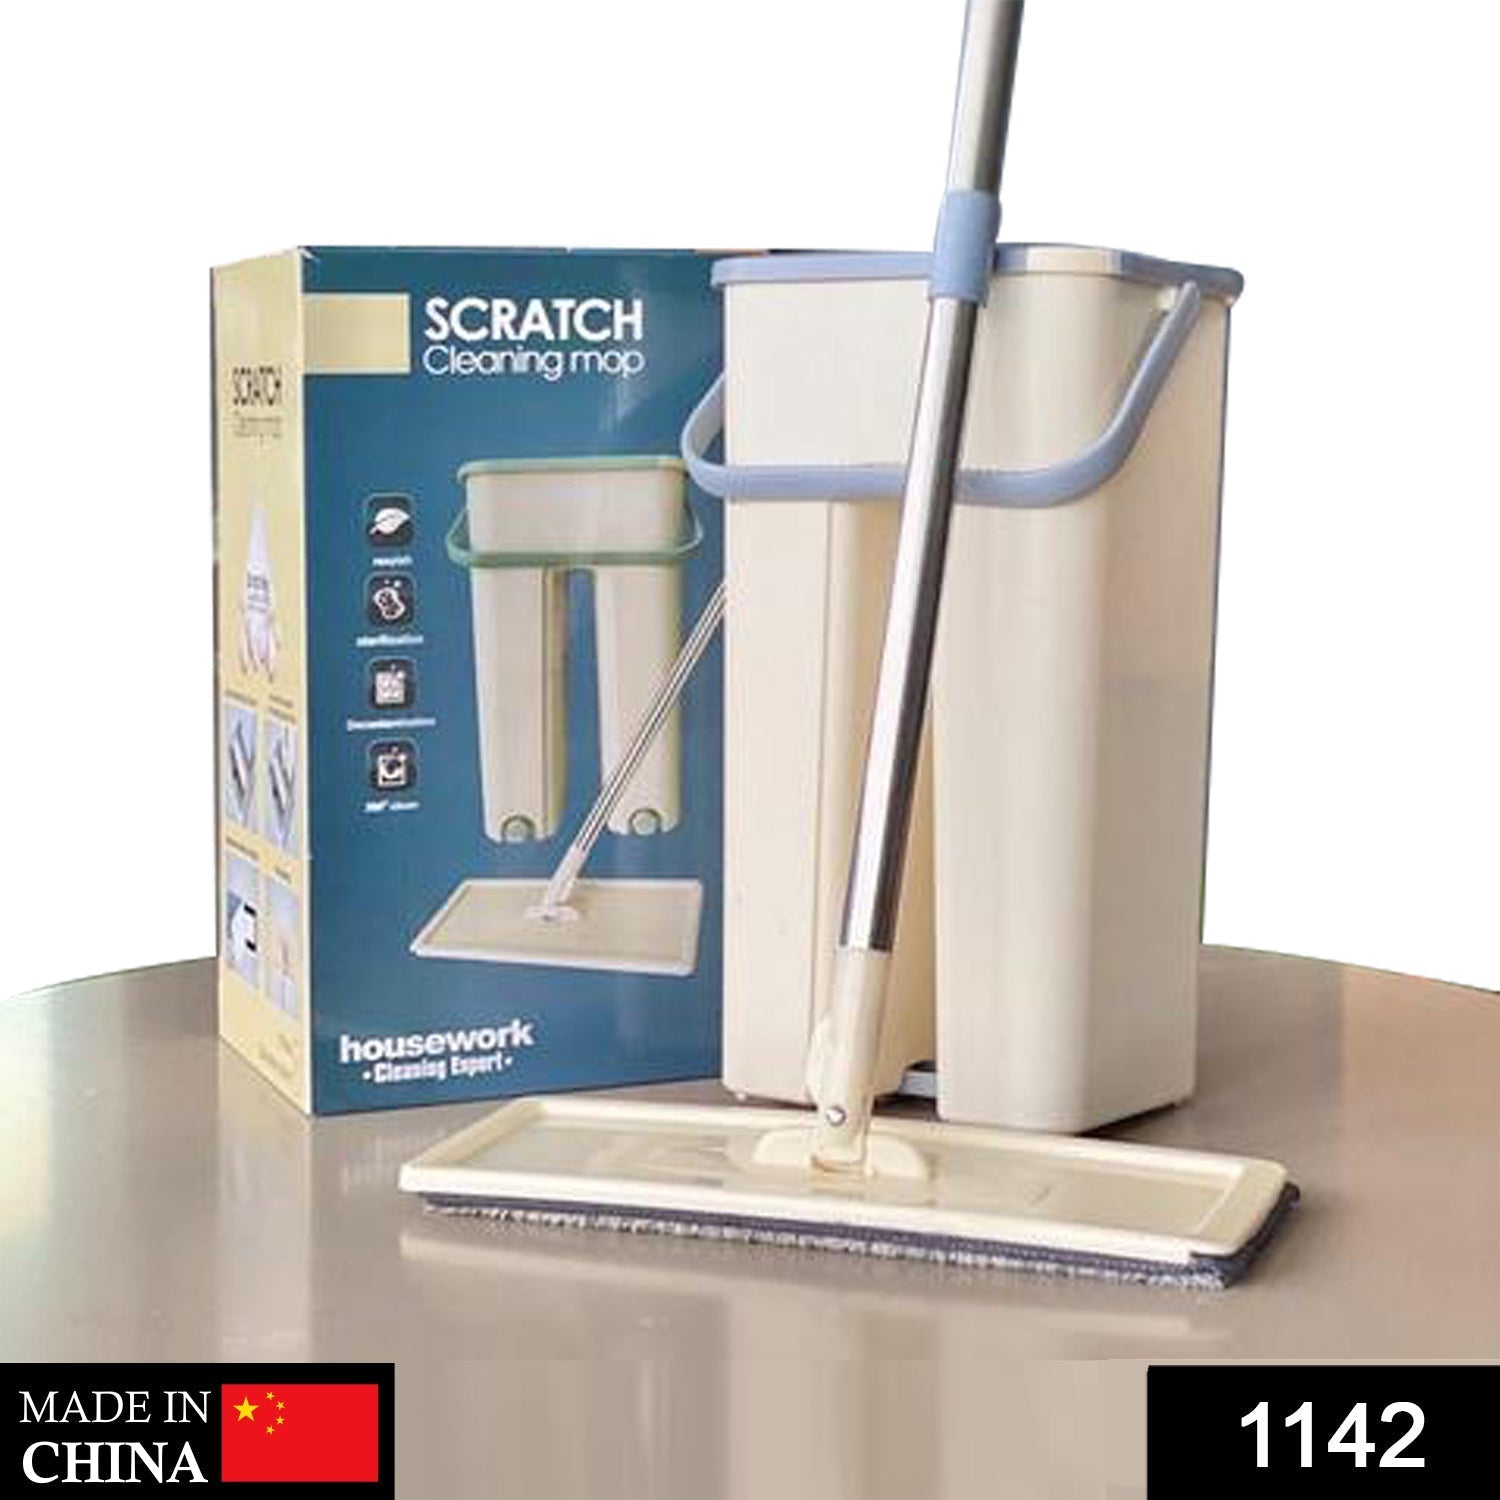 1142 Scratch Cleaning Mop with 2 in 1 Self Clean Wash Dry Hands Free Flat Mop 